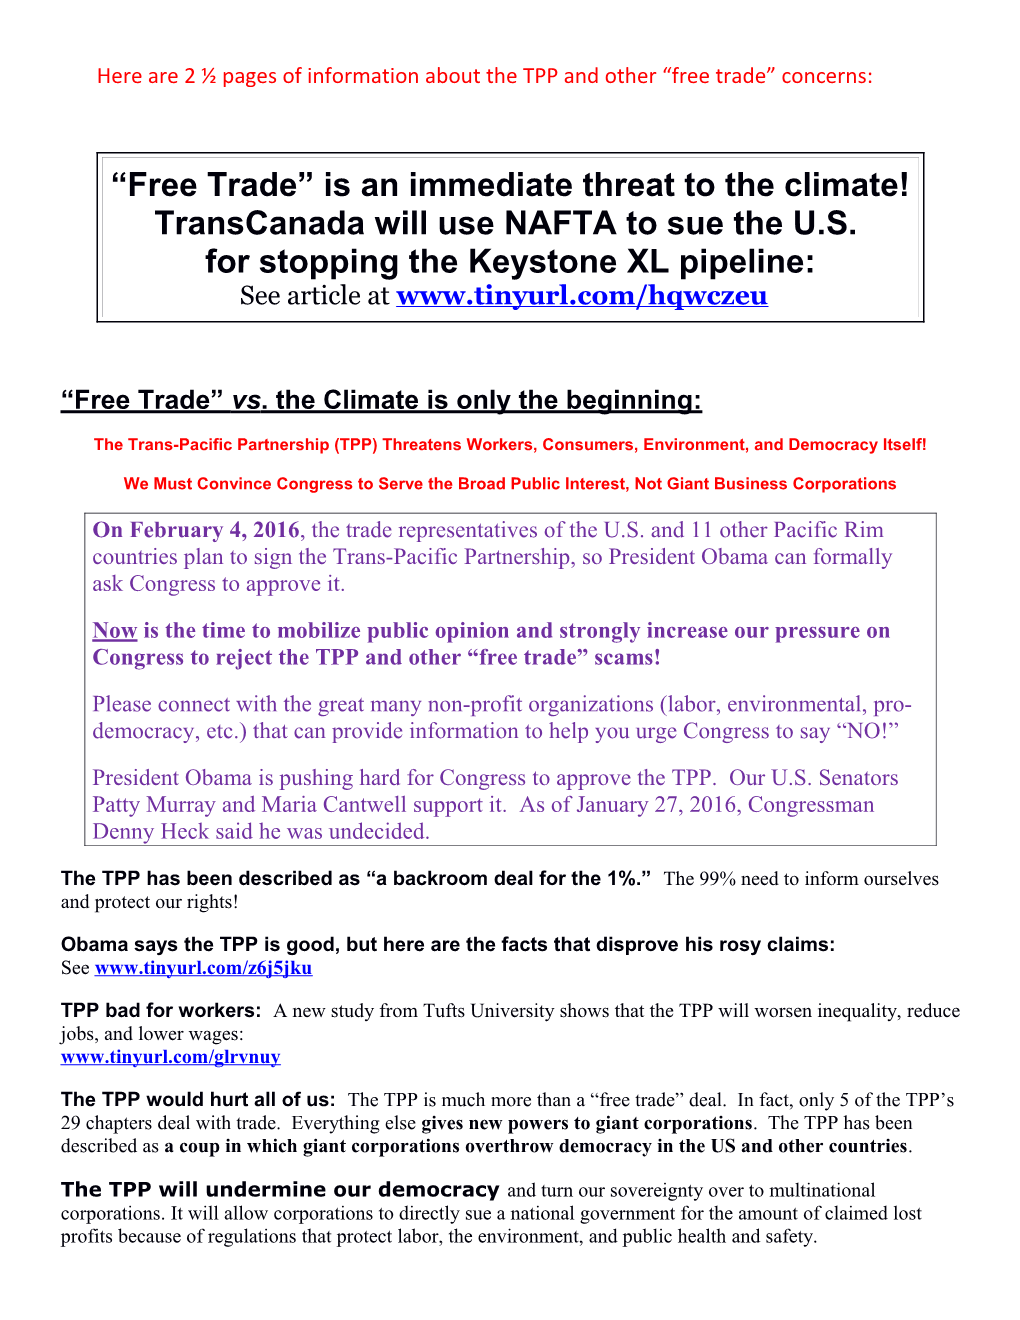 Free Trade Vs. the Climate Is Only the Beginning